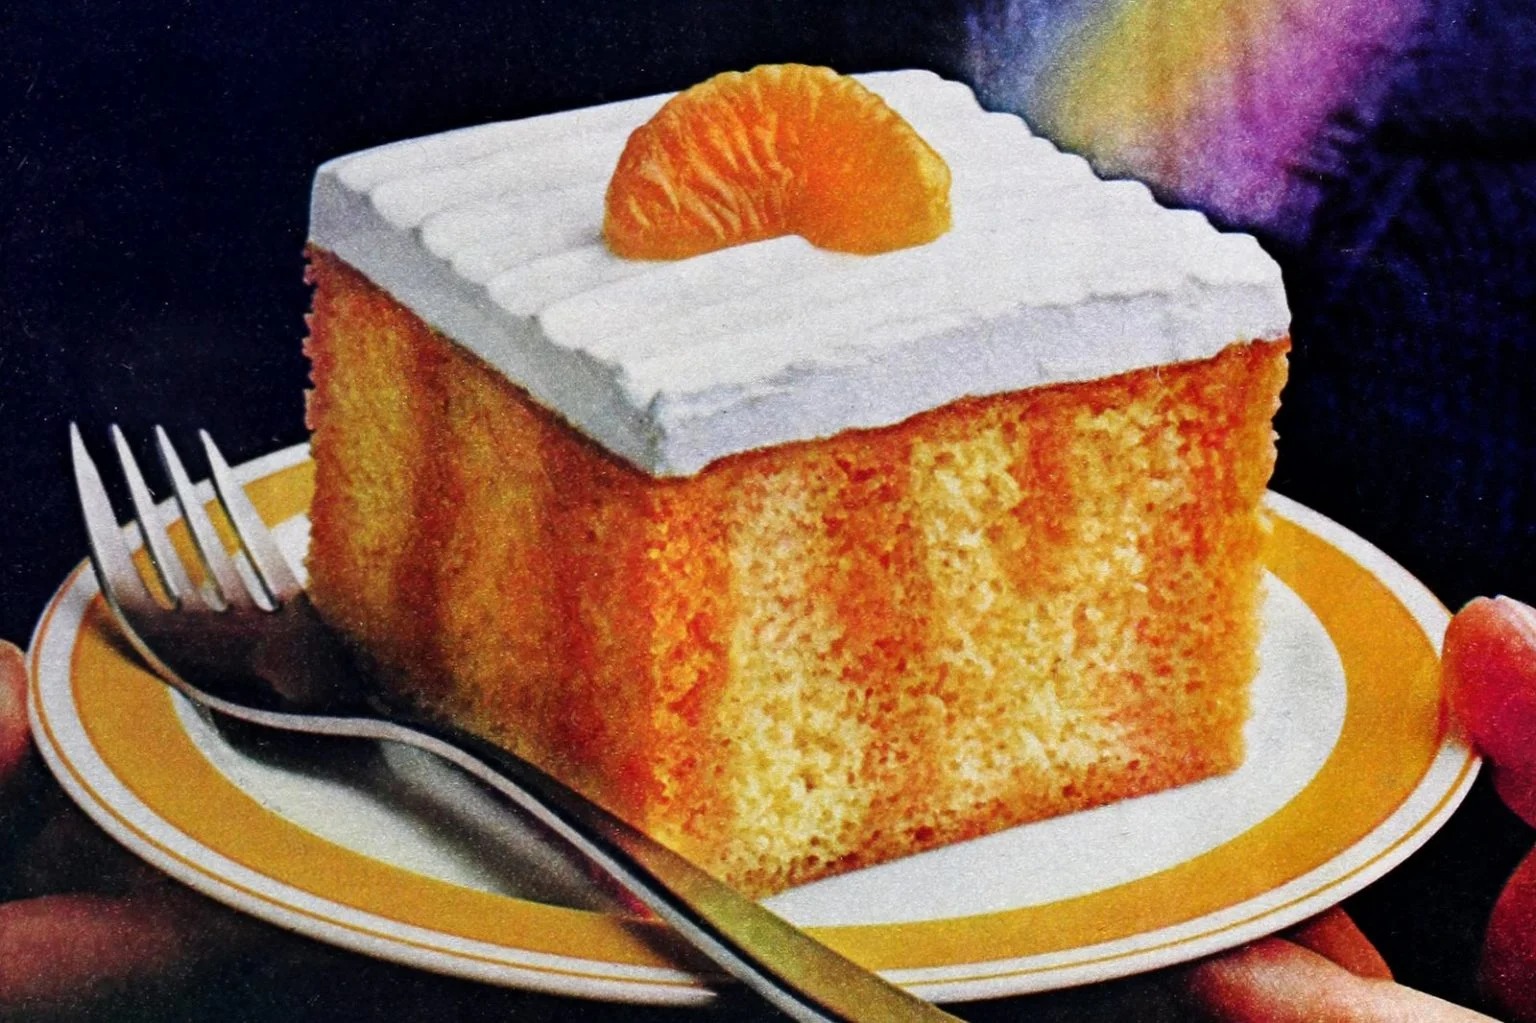 Trust Me, I Can Tell Which Generation You’re from Based on the Retro Food You Like Poke cake